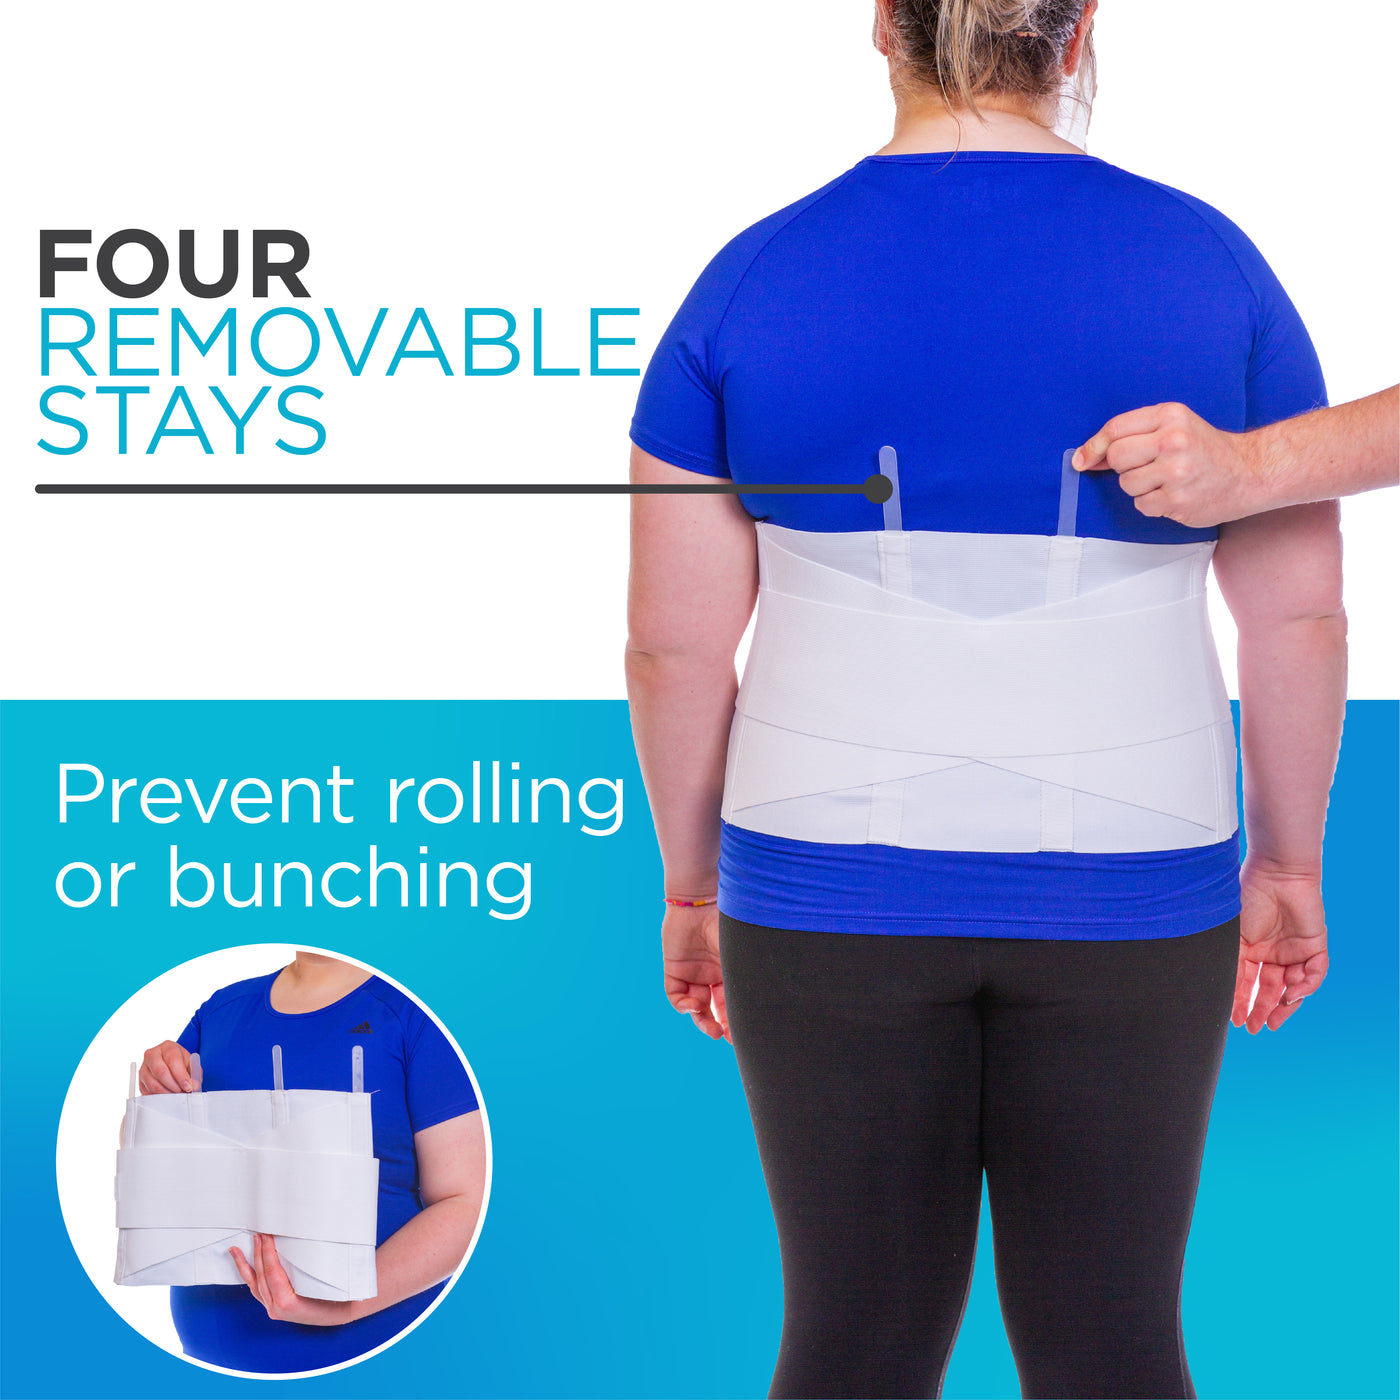 the four removable stays on the back brace prevent rolling or bunching and can be removed